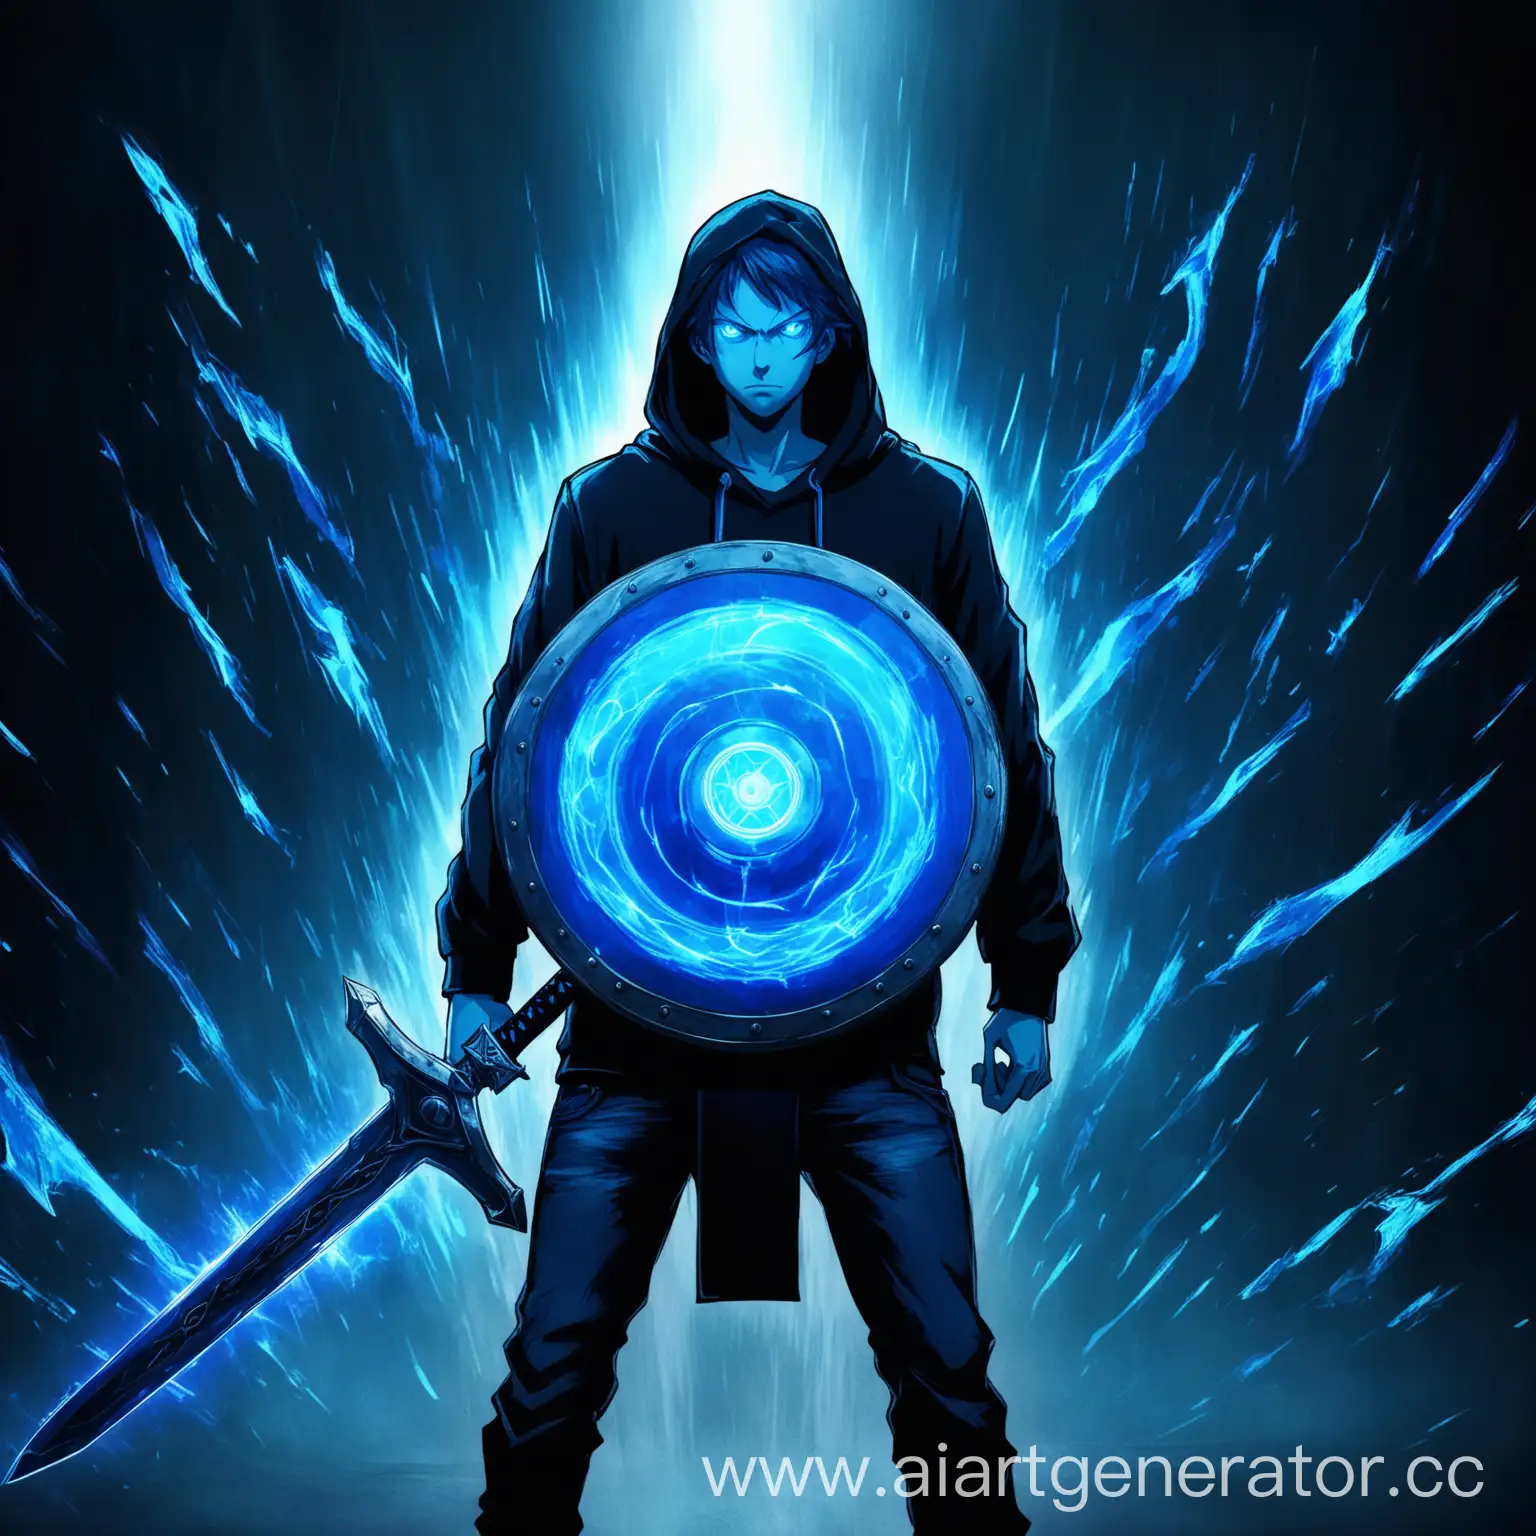 Lololoshka stands in the middle of a dark room, surrounded by pulsating blue energy. He is wearing a black hoodie and jeans, and his eyes glow blue. In his right hand he holds a sword, and in his left a shield. He looks straight ahead with a determined expression.